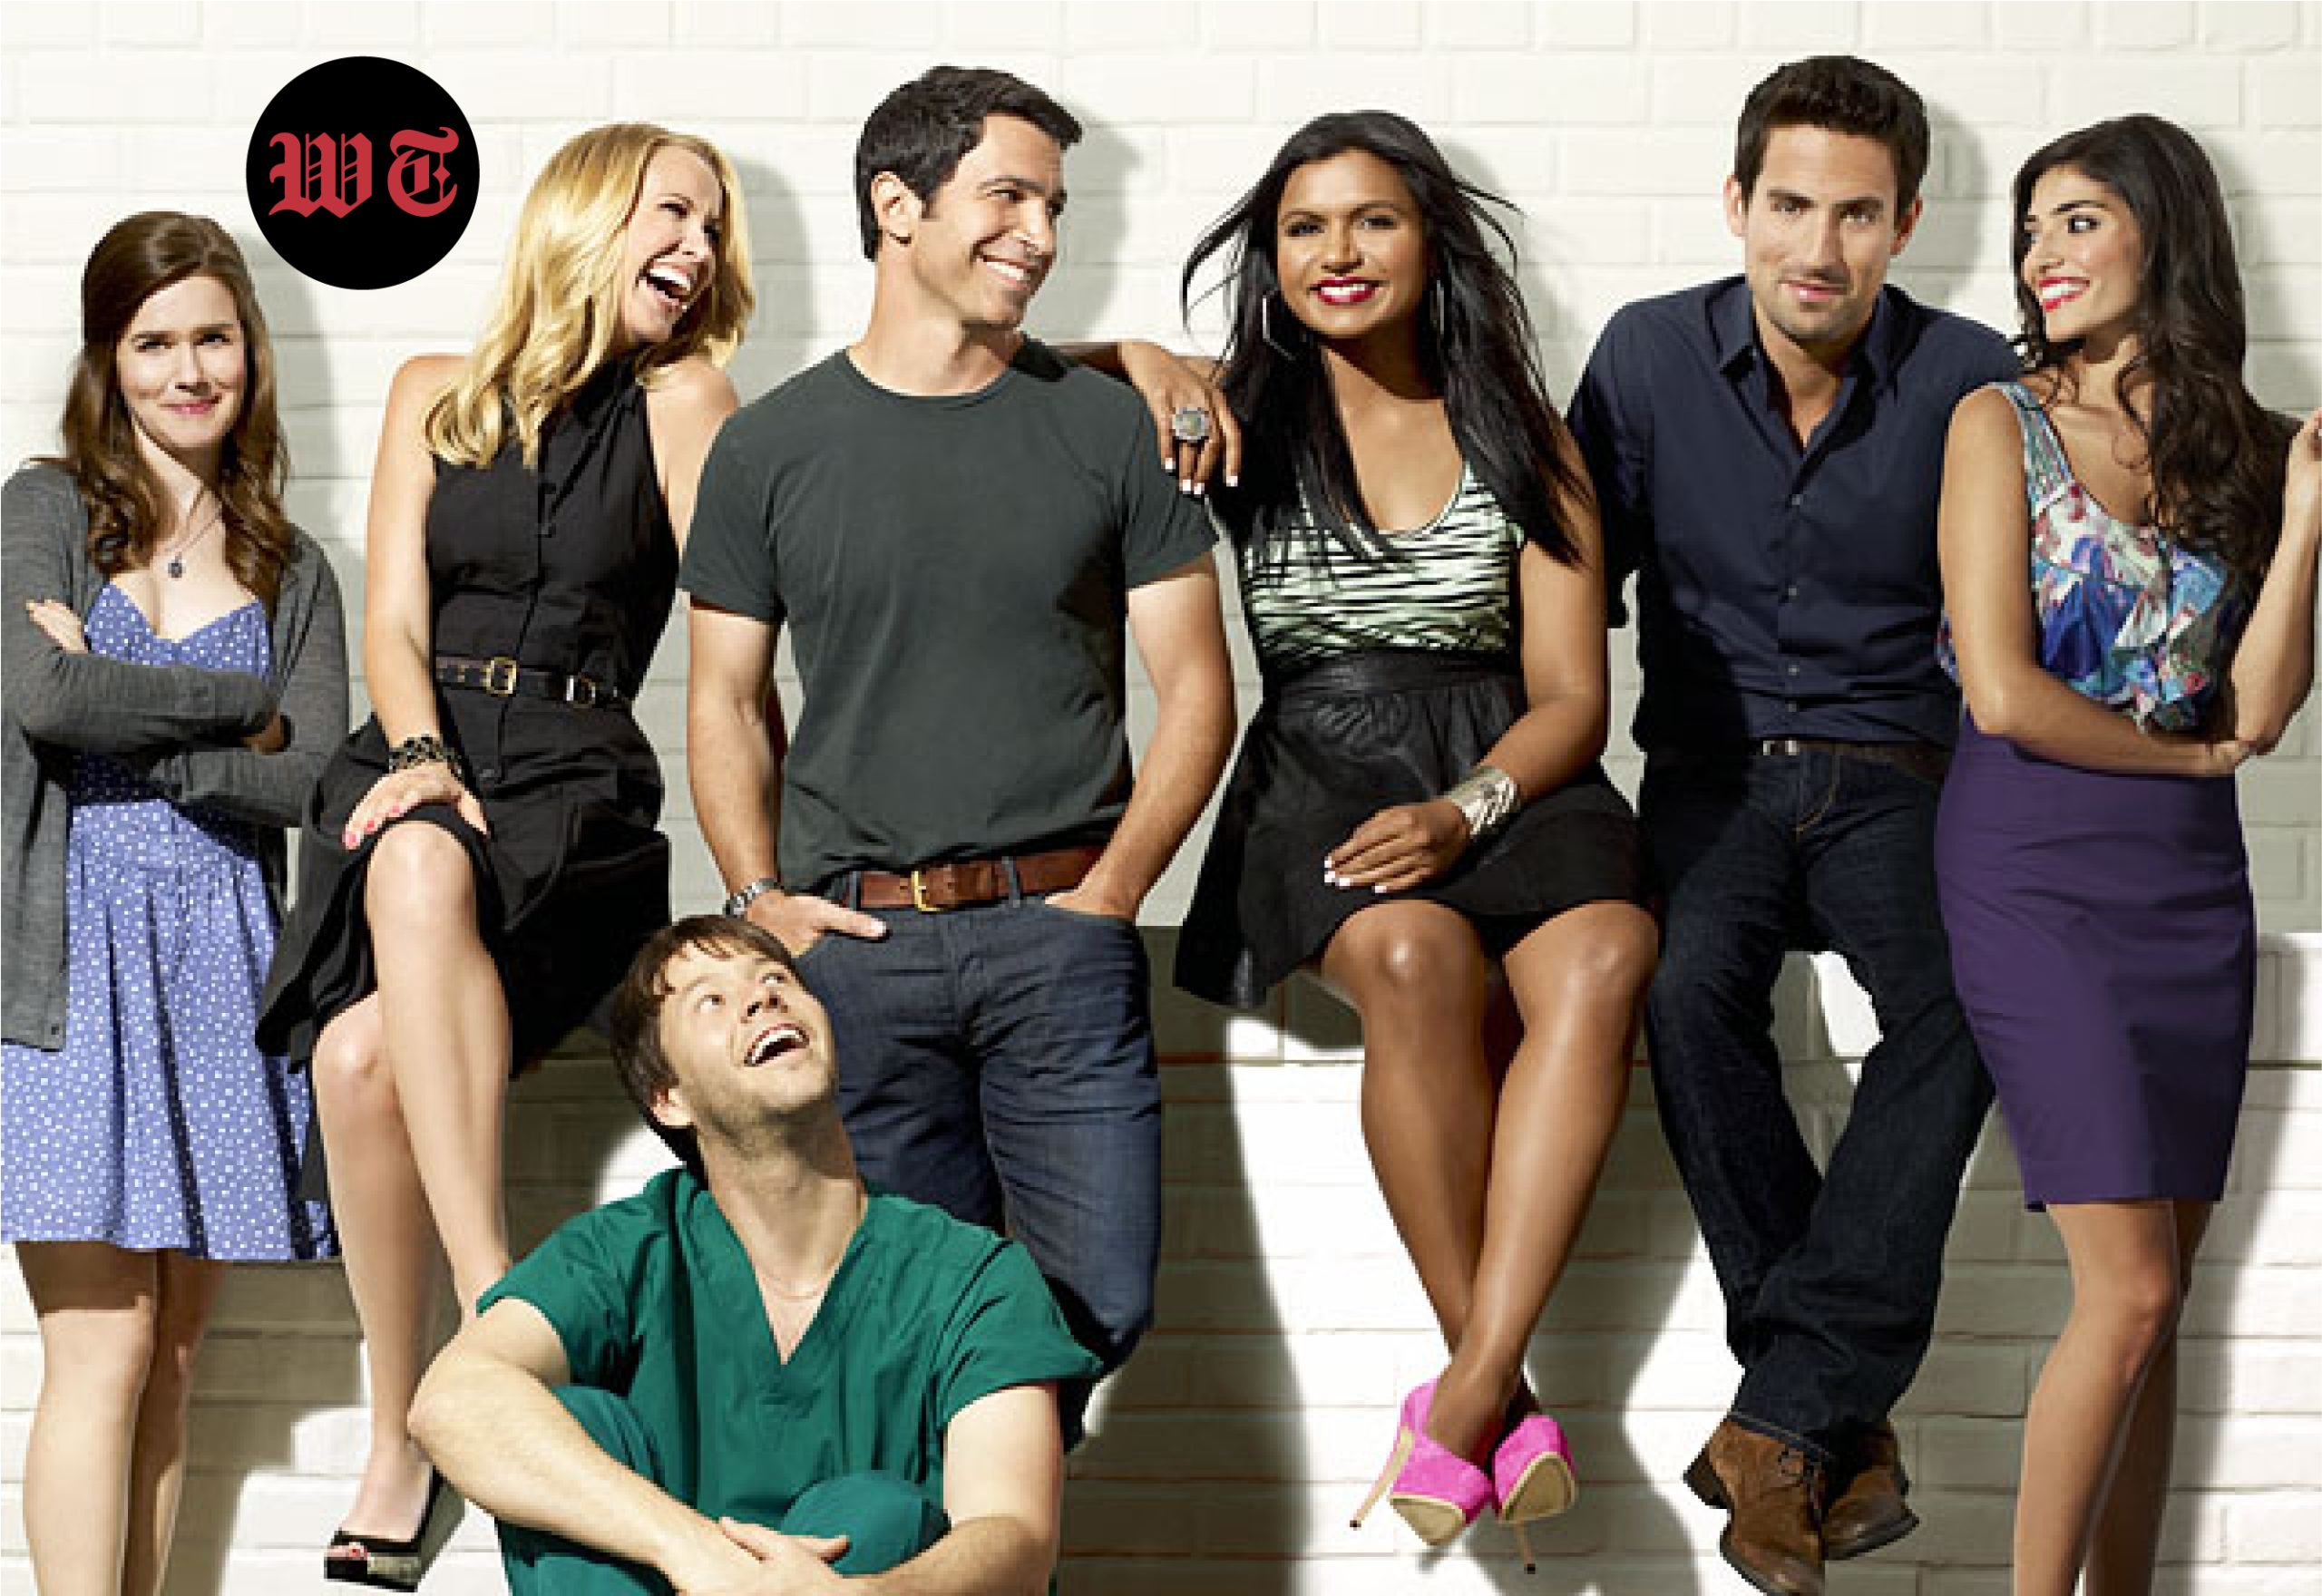 The Mindy Project cast